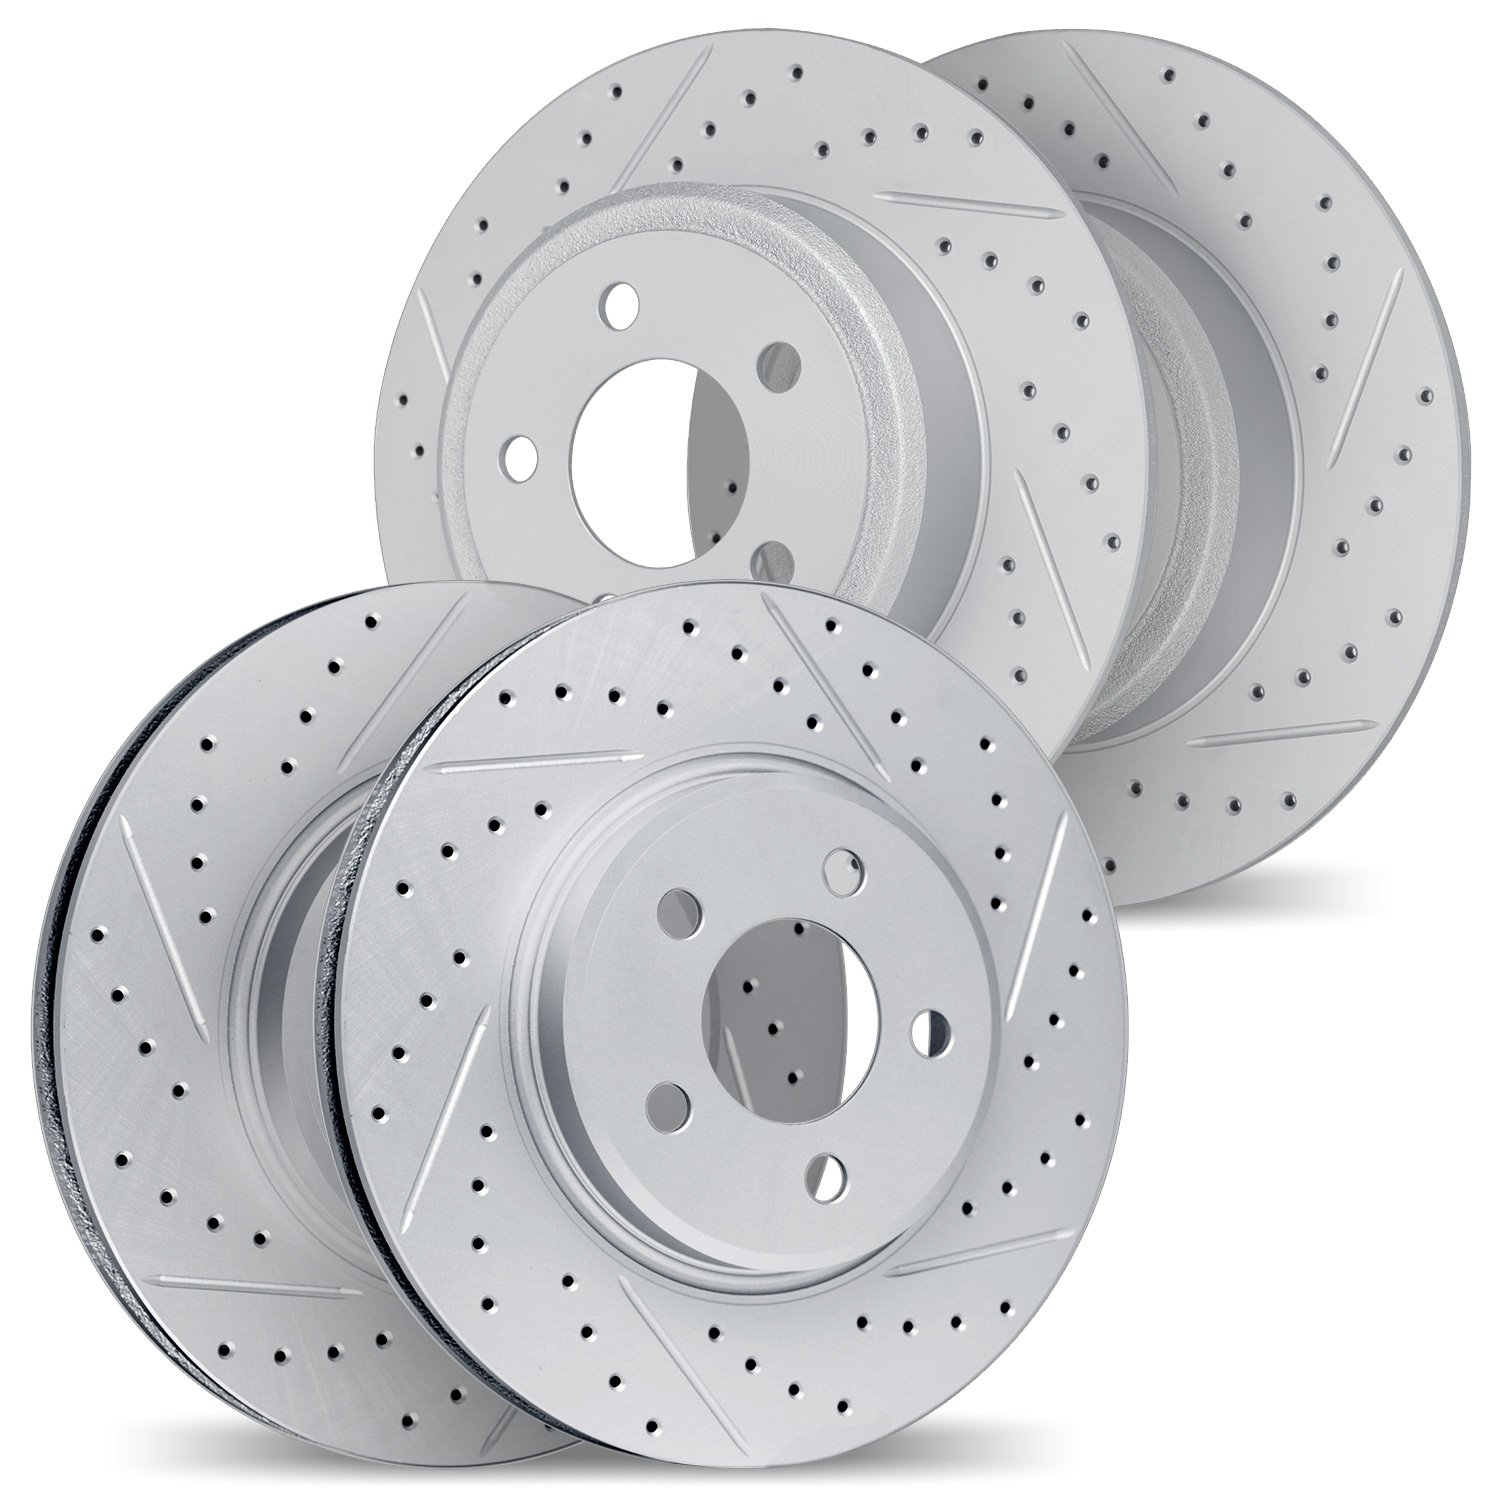 2004-74018 Geoperformance Drilled/Slotted Brake Rotors, 2013-2018 Audi/Volkswagen, Position: Front and Rear